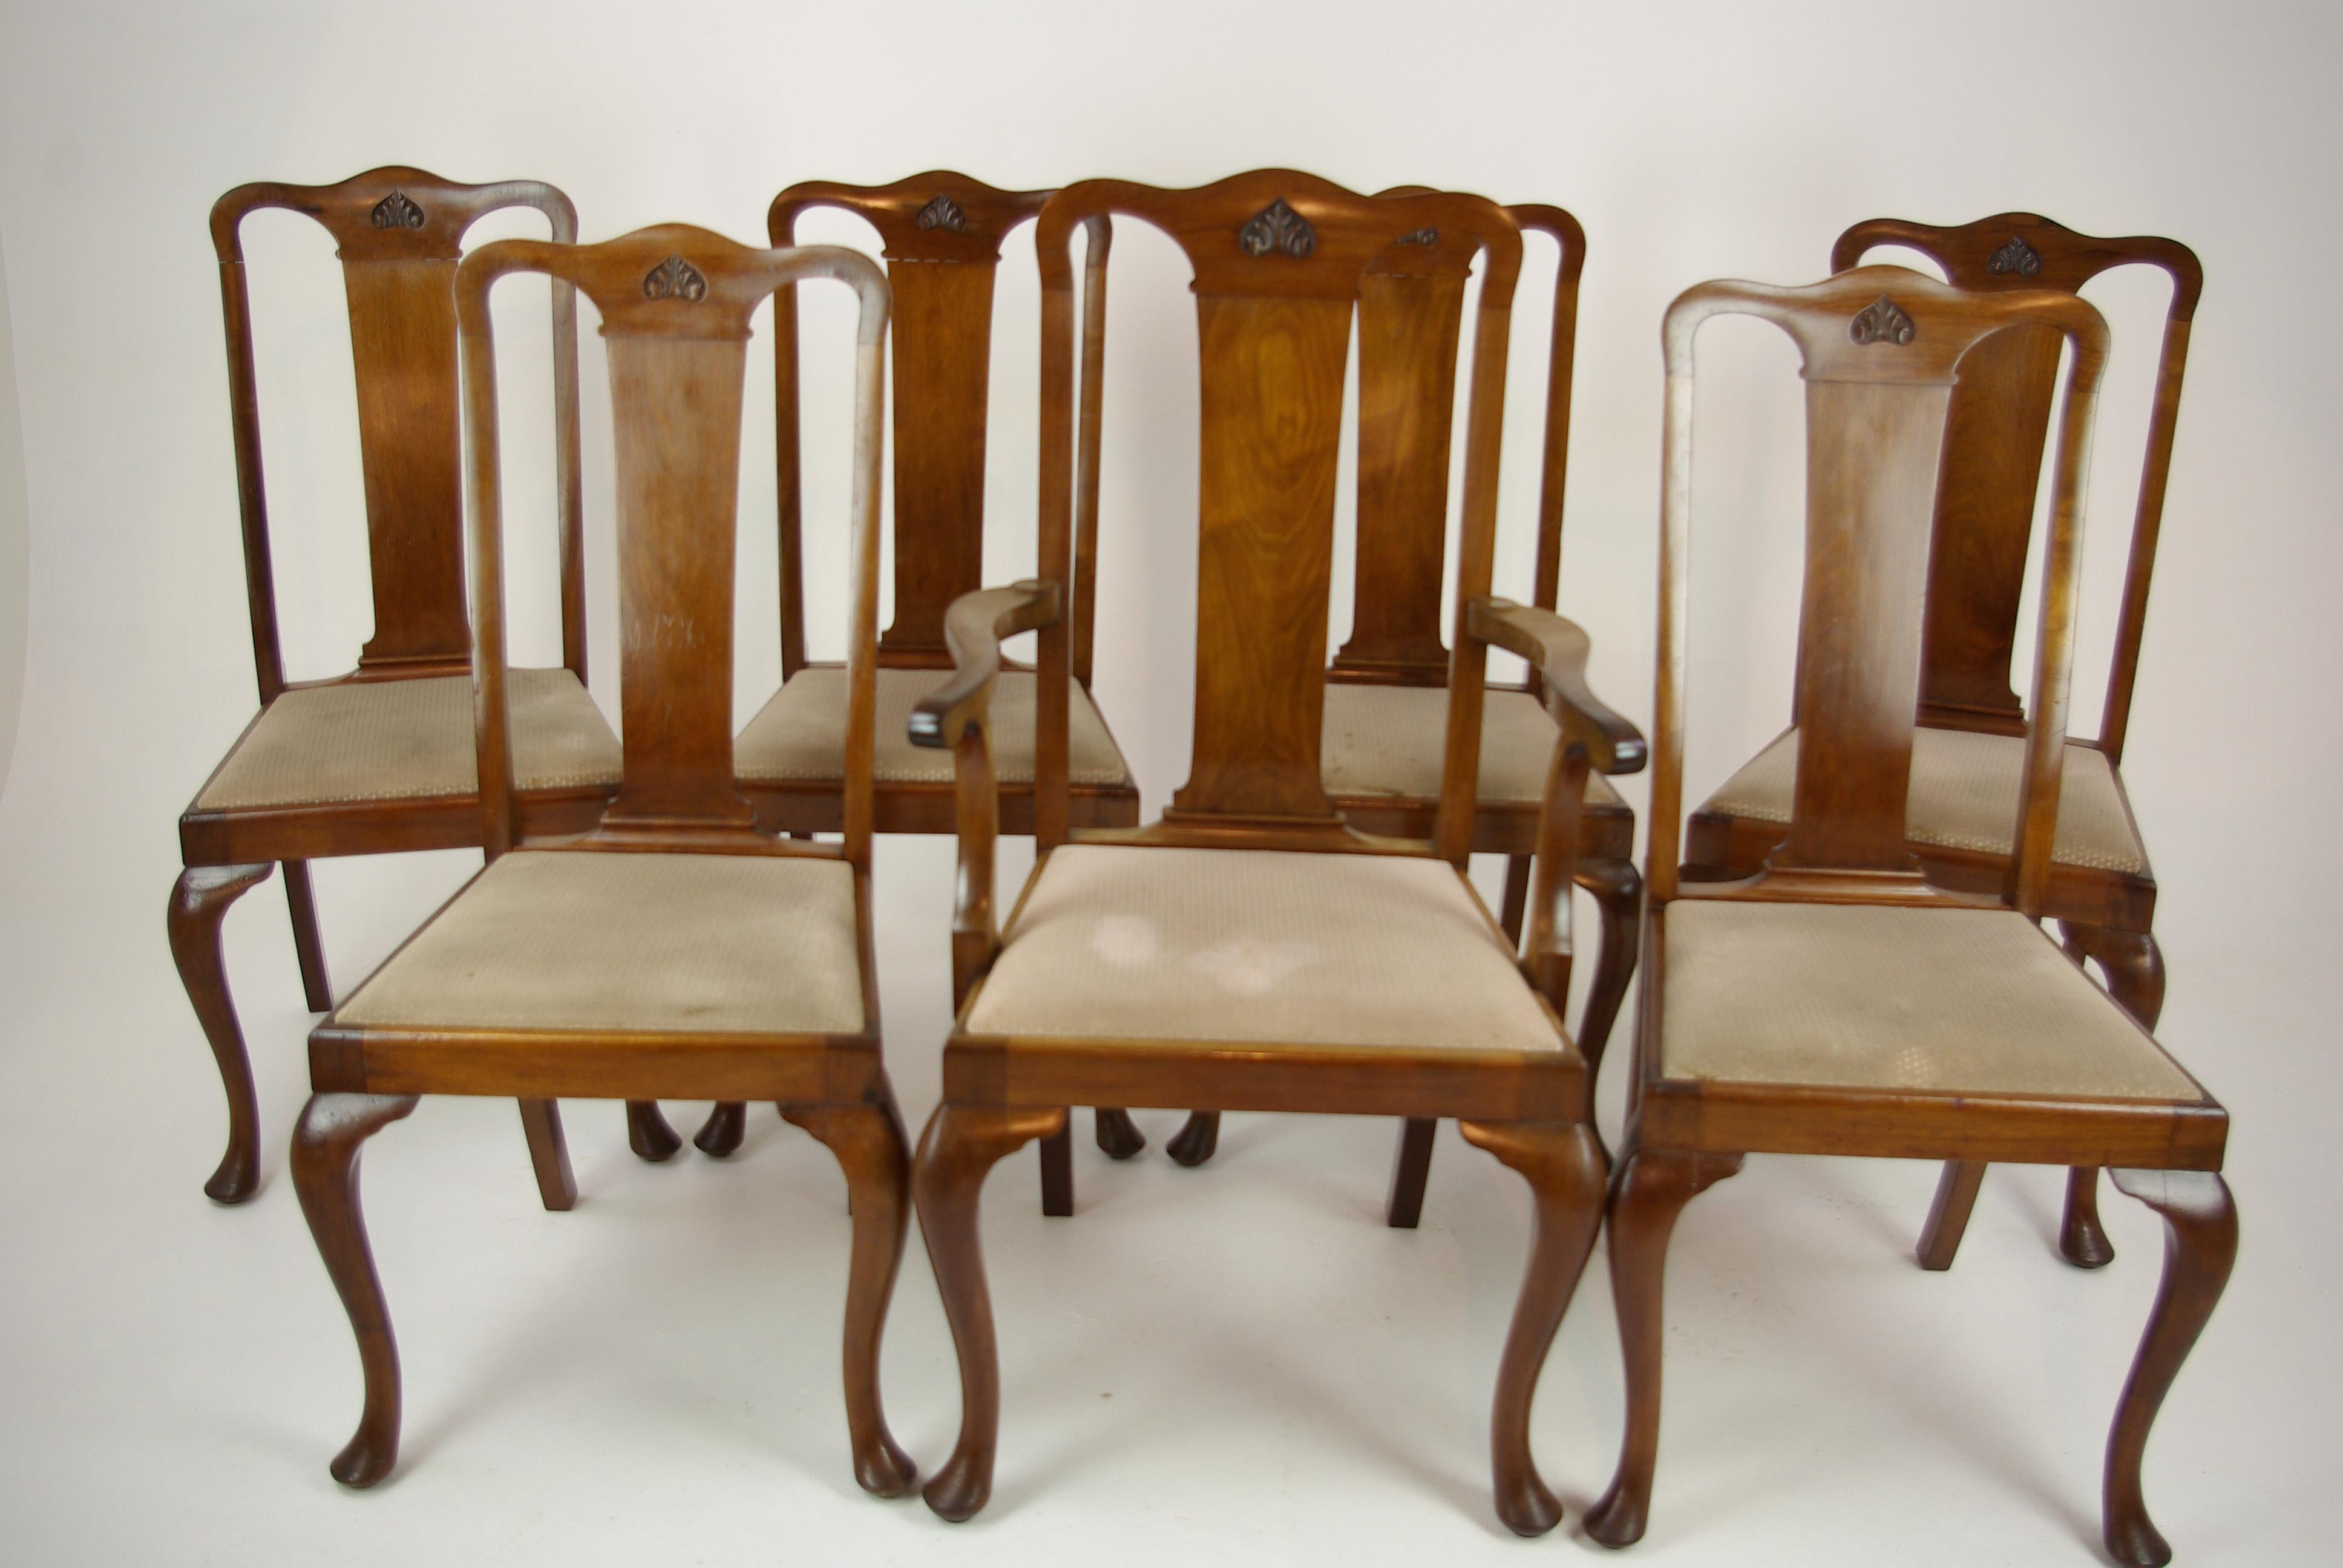 Antique Walnut Chairs, Queen Anne Chairs, 7 Dining Chairs, Scotland 1920, B1196 5